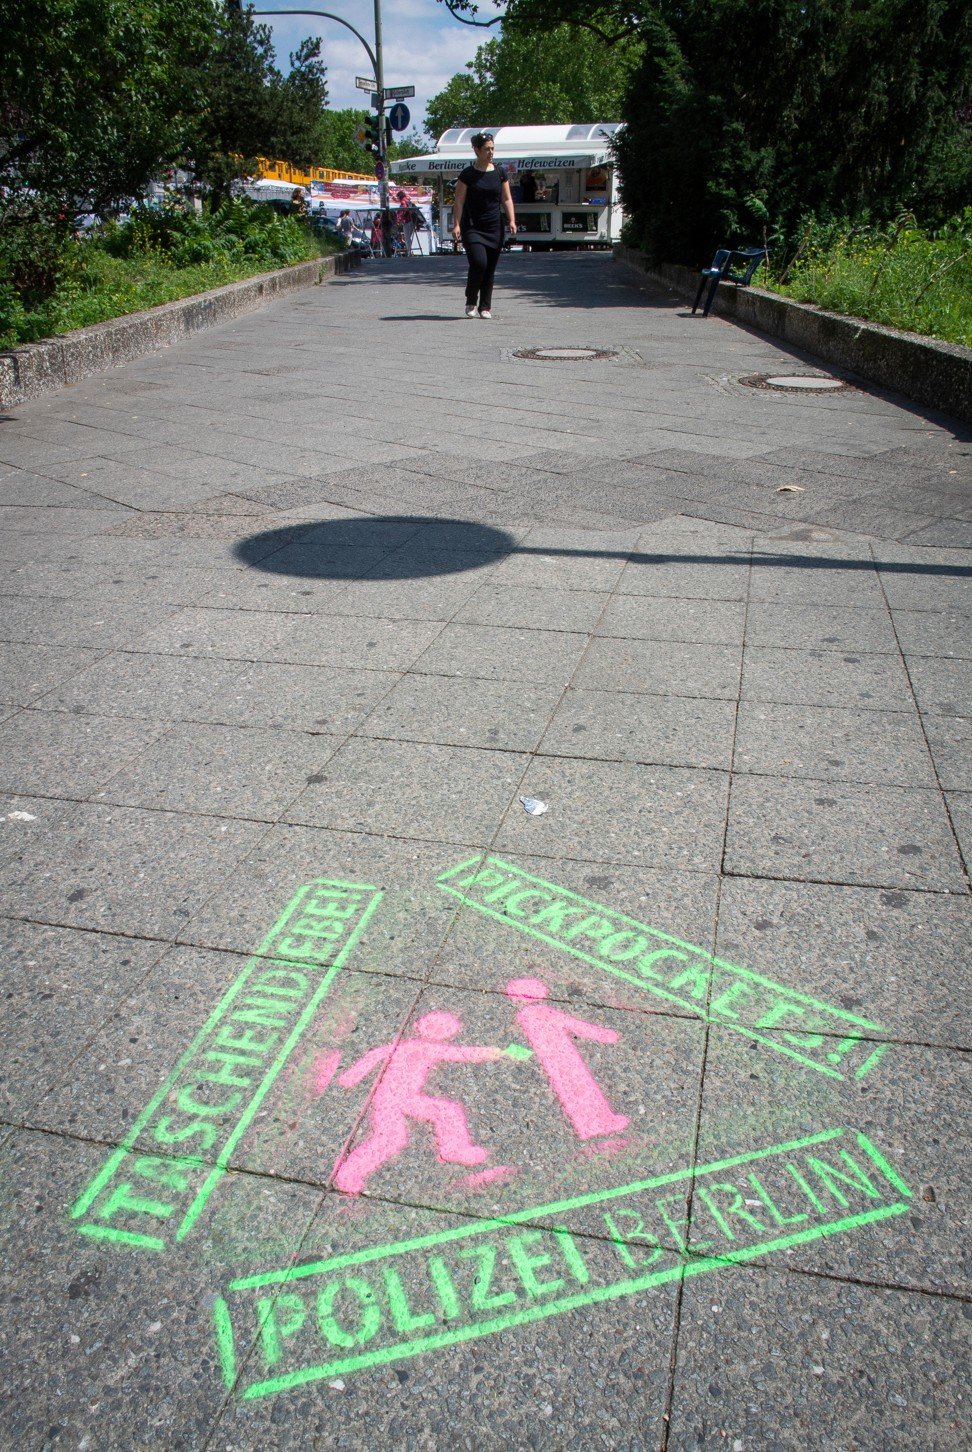 A sign warns of pickpockets in Berlin. Photo: Alamy